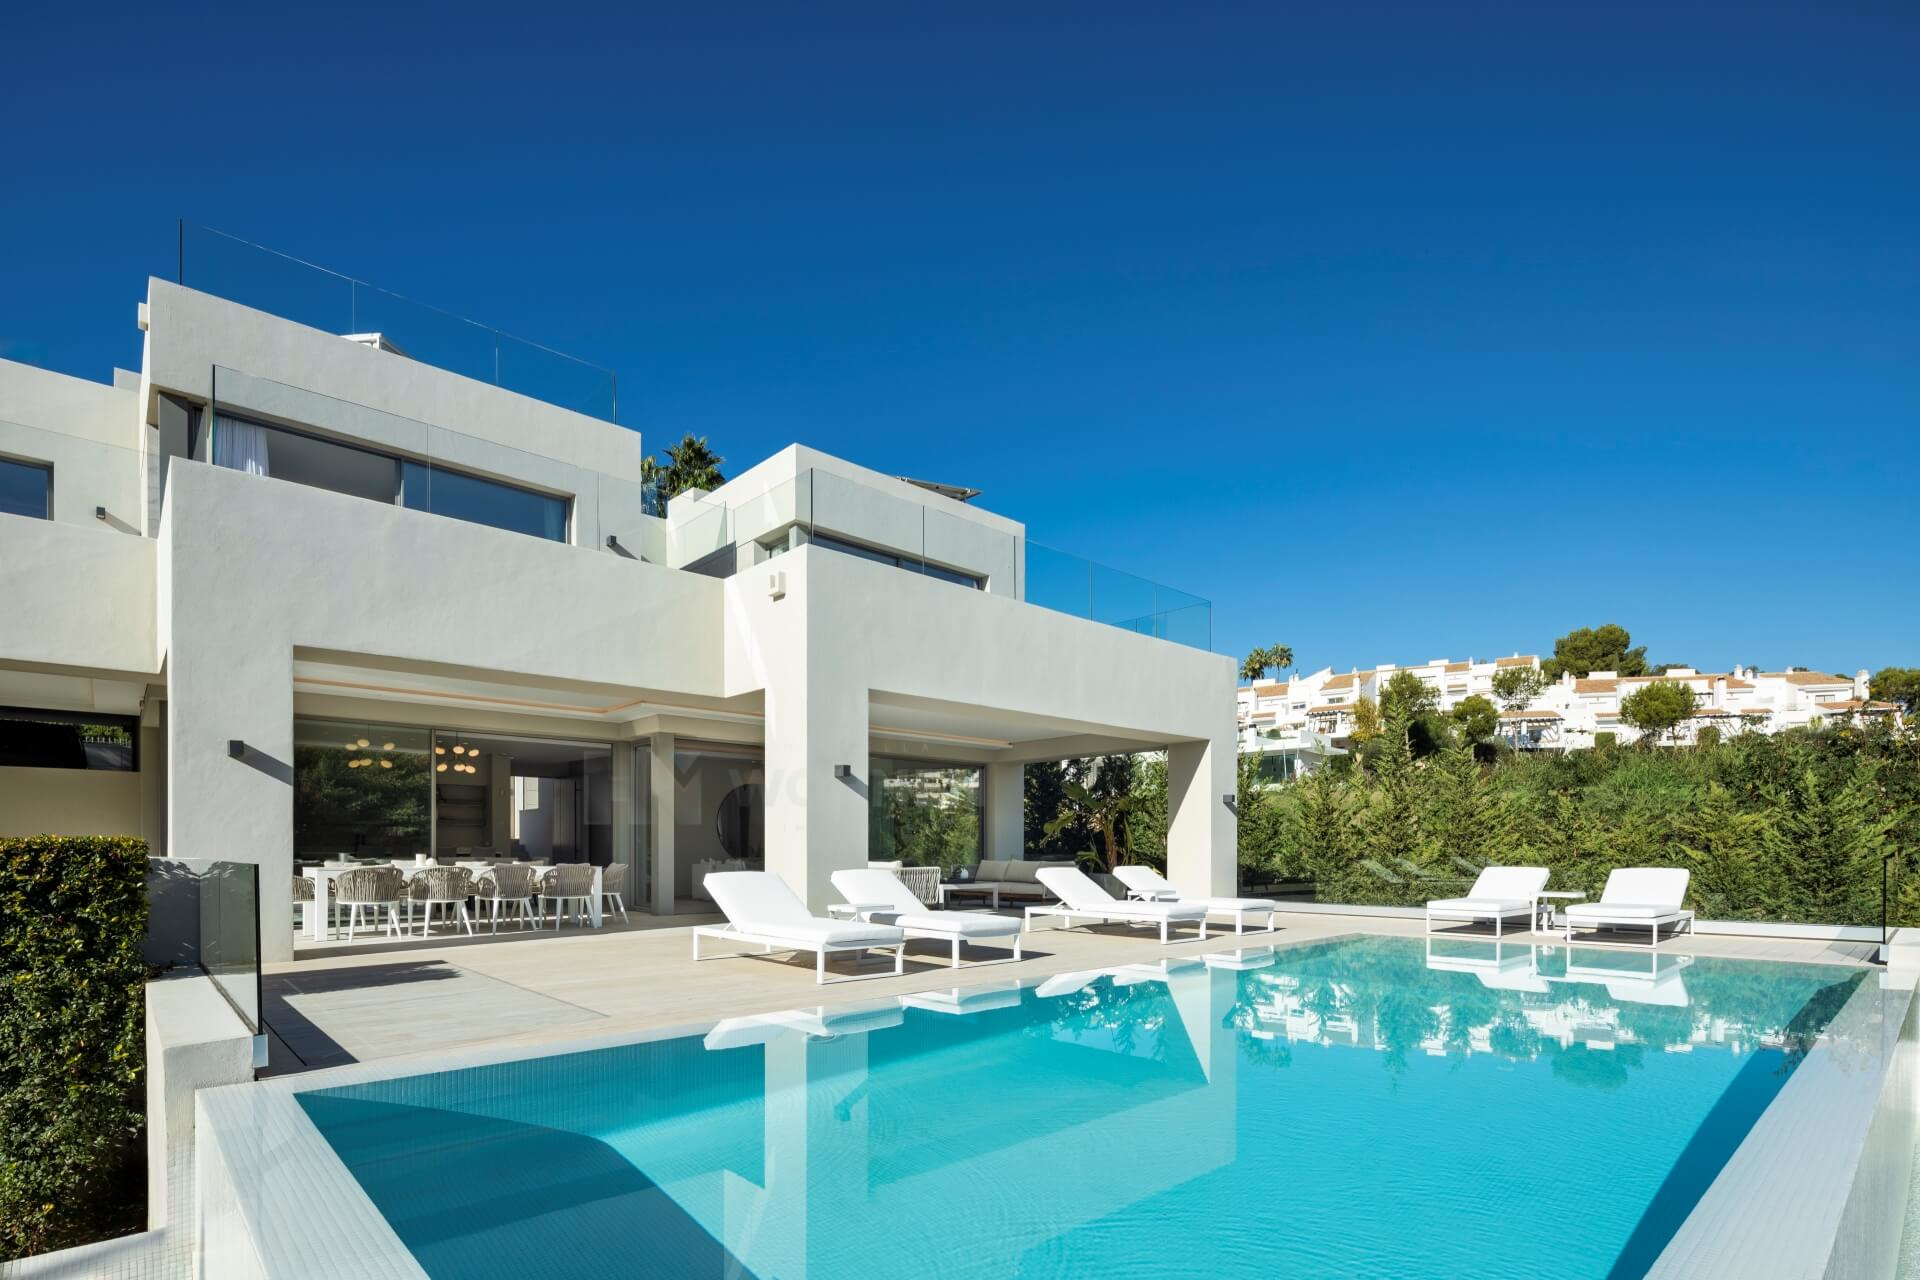 Luxury villa ideally situated in the coveted Nueva Andalucia area